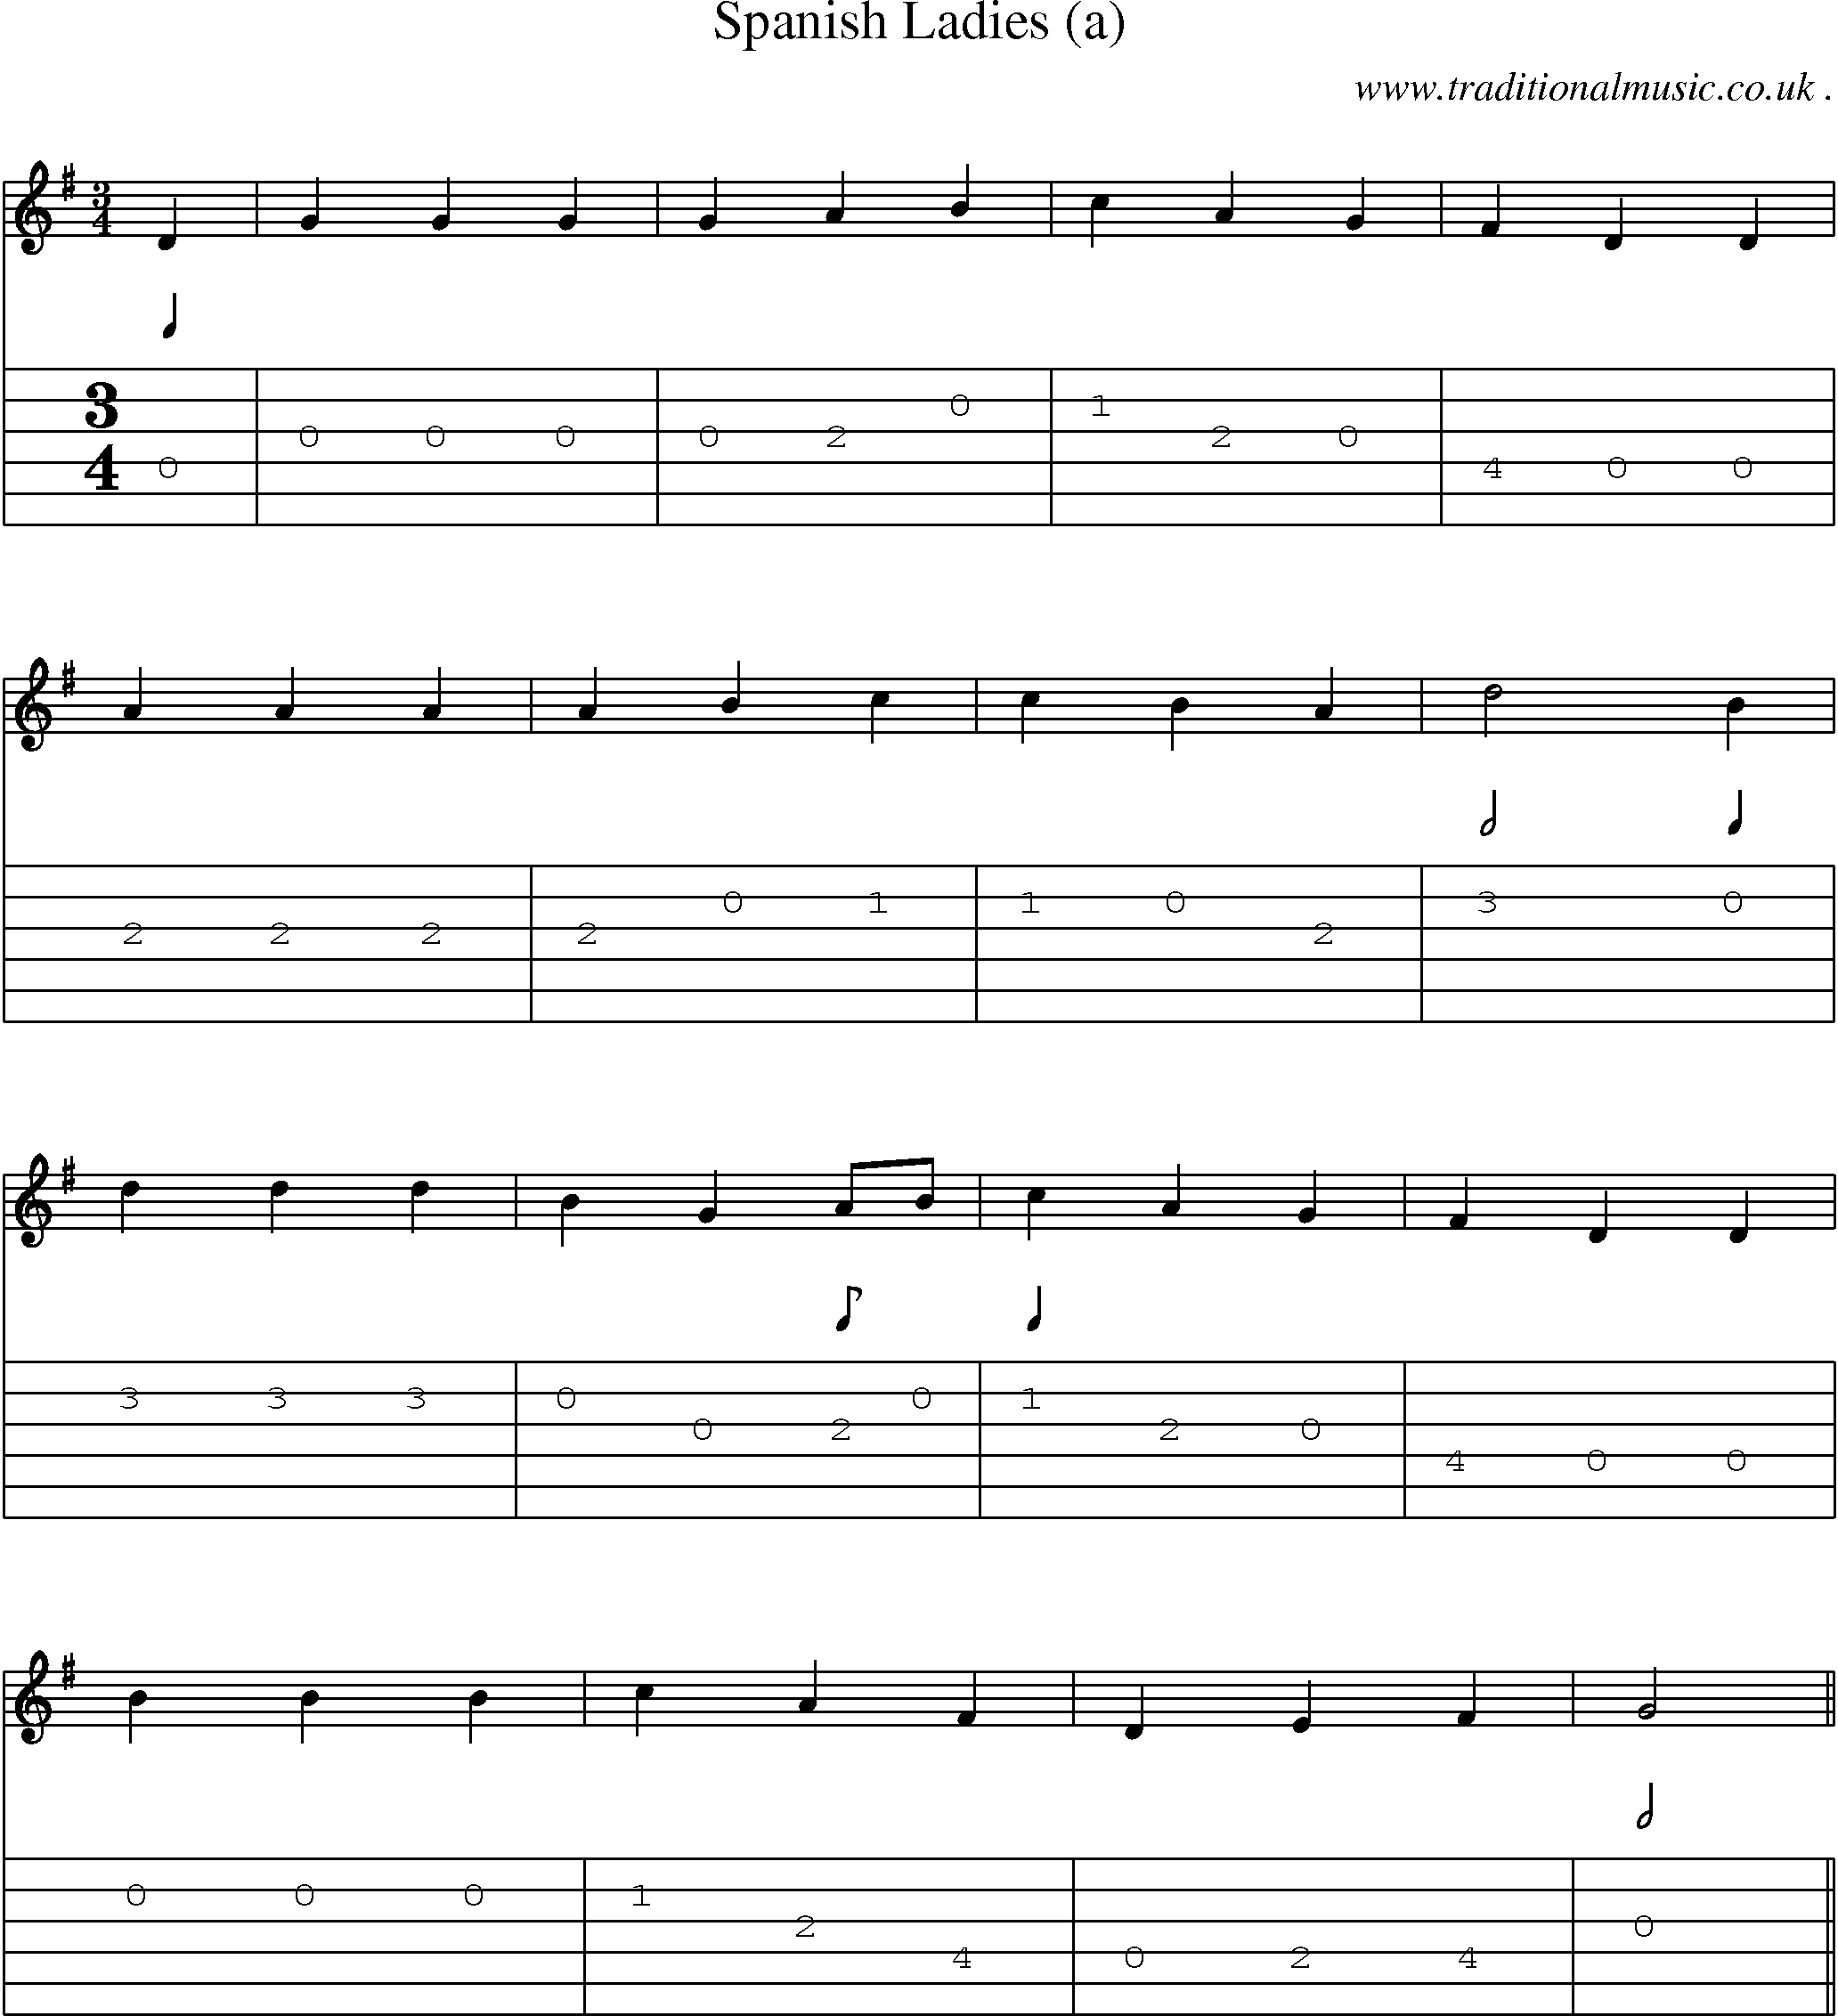 Sheet-Music and Guitar Tabs for Spanish Ladies (a)